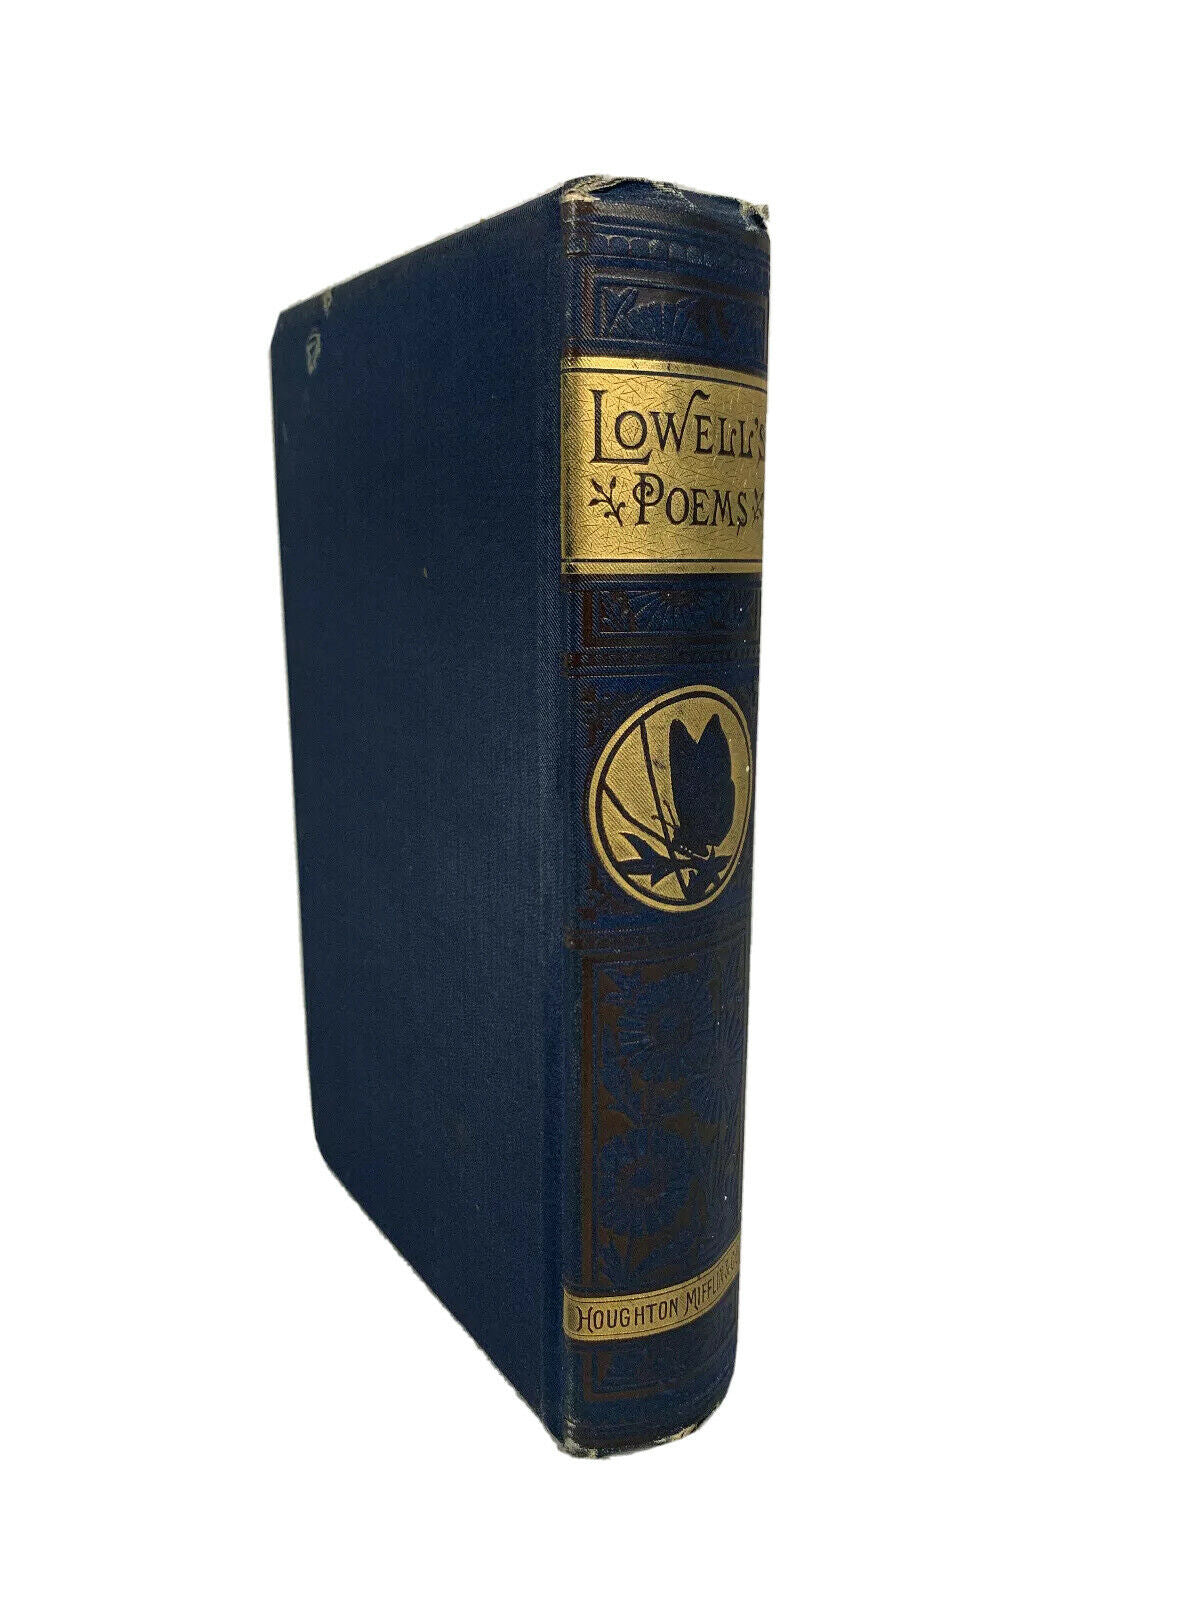 Lowell's Poems: The Poetical Works of James Russell Lowell 1884